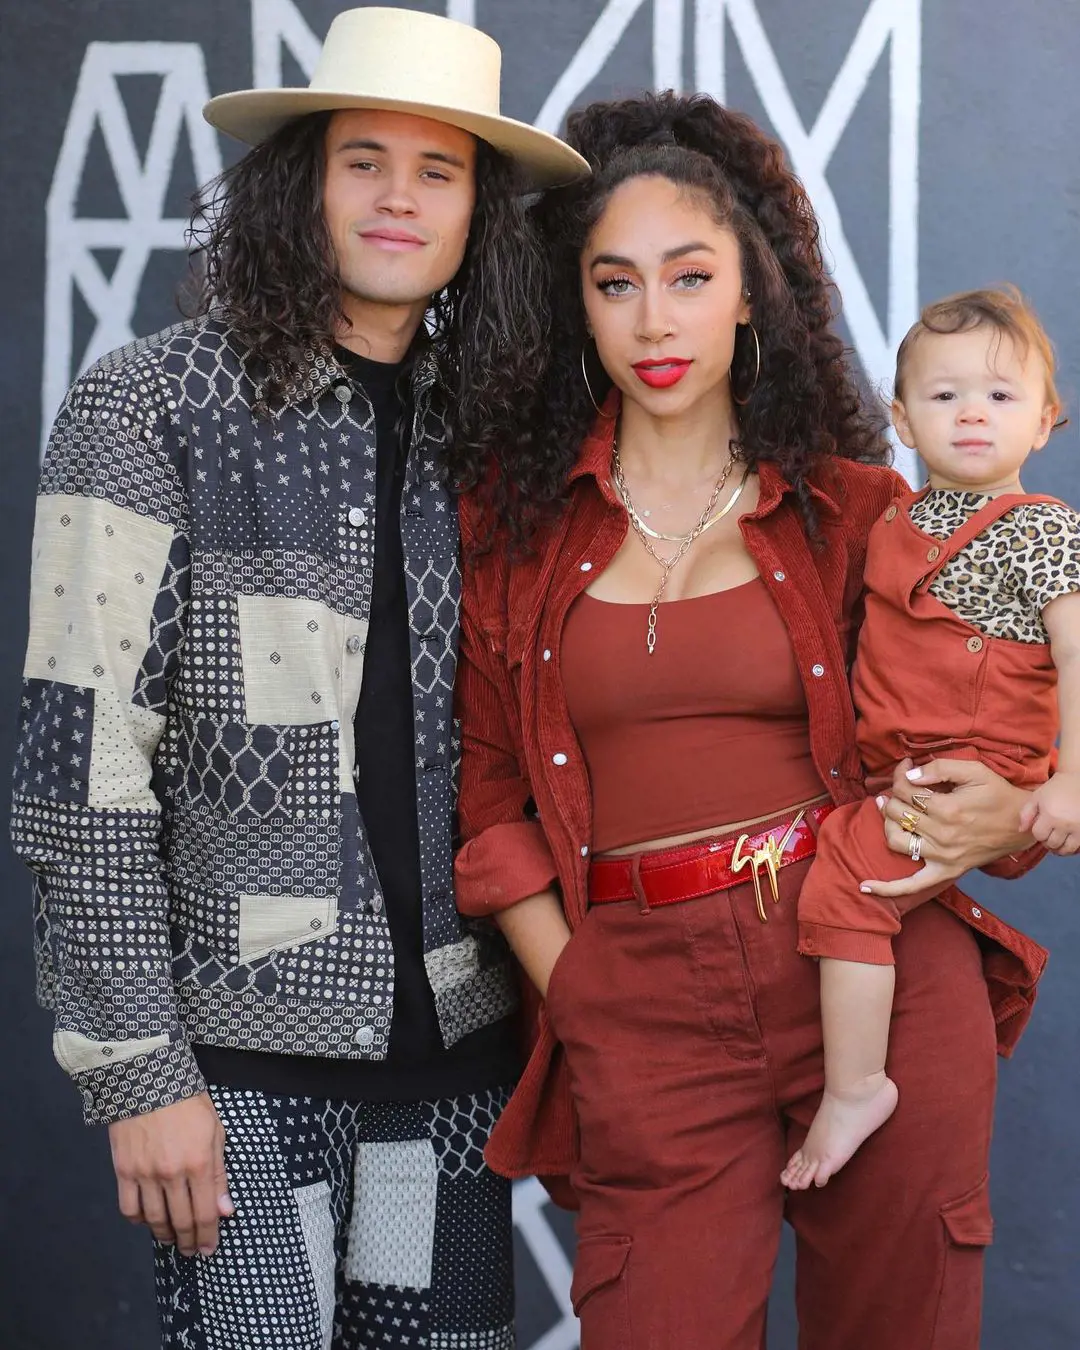 Shan Boodram along with her husband Jared Brady and their baby.